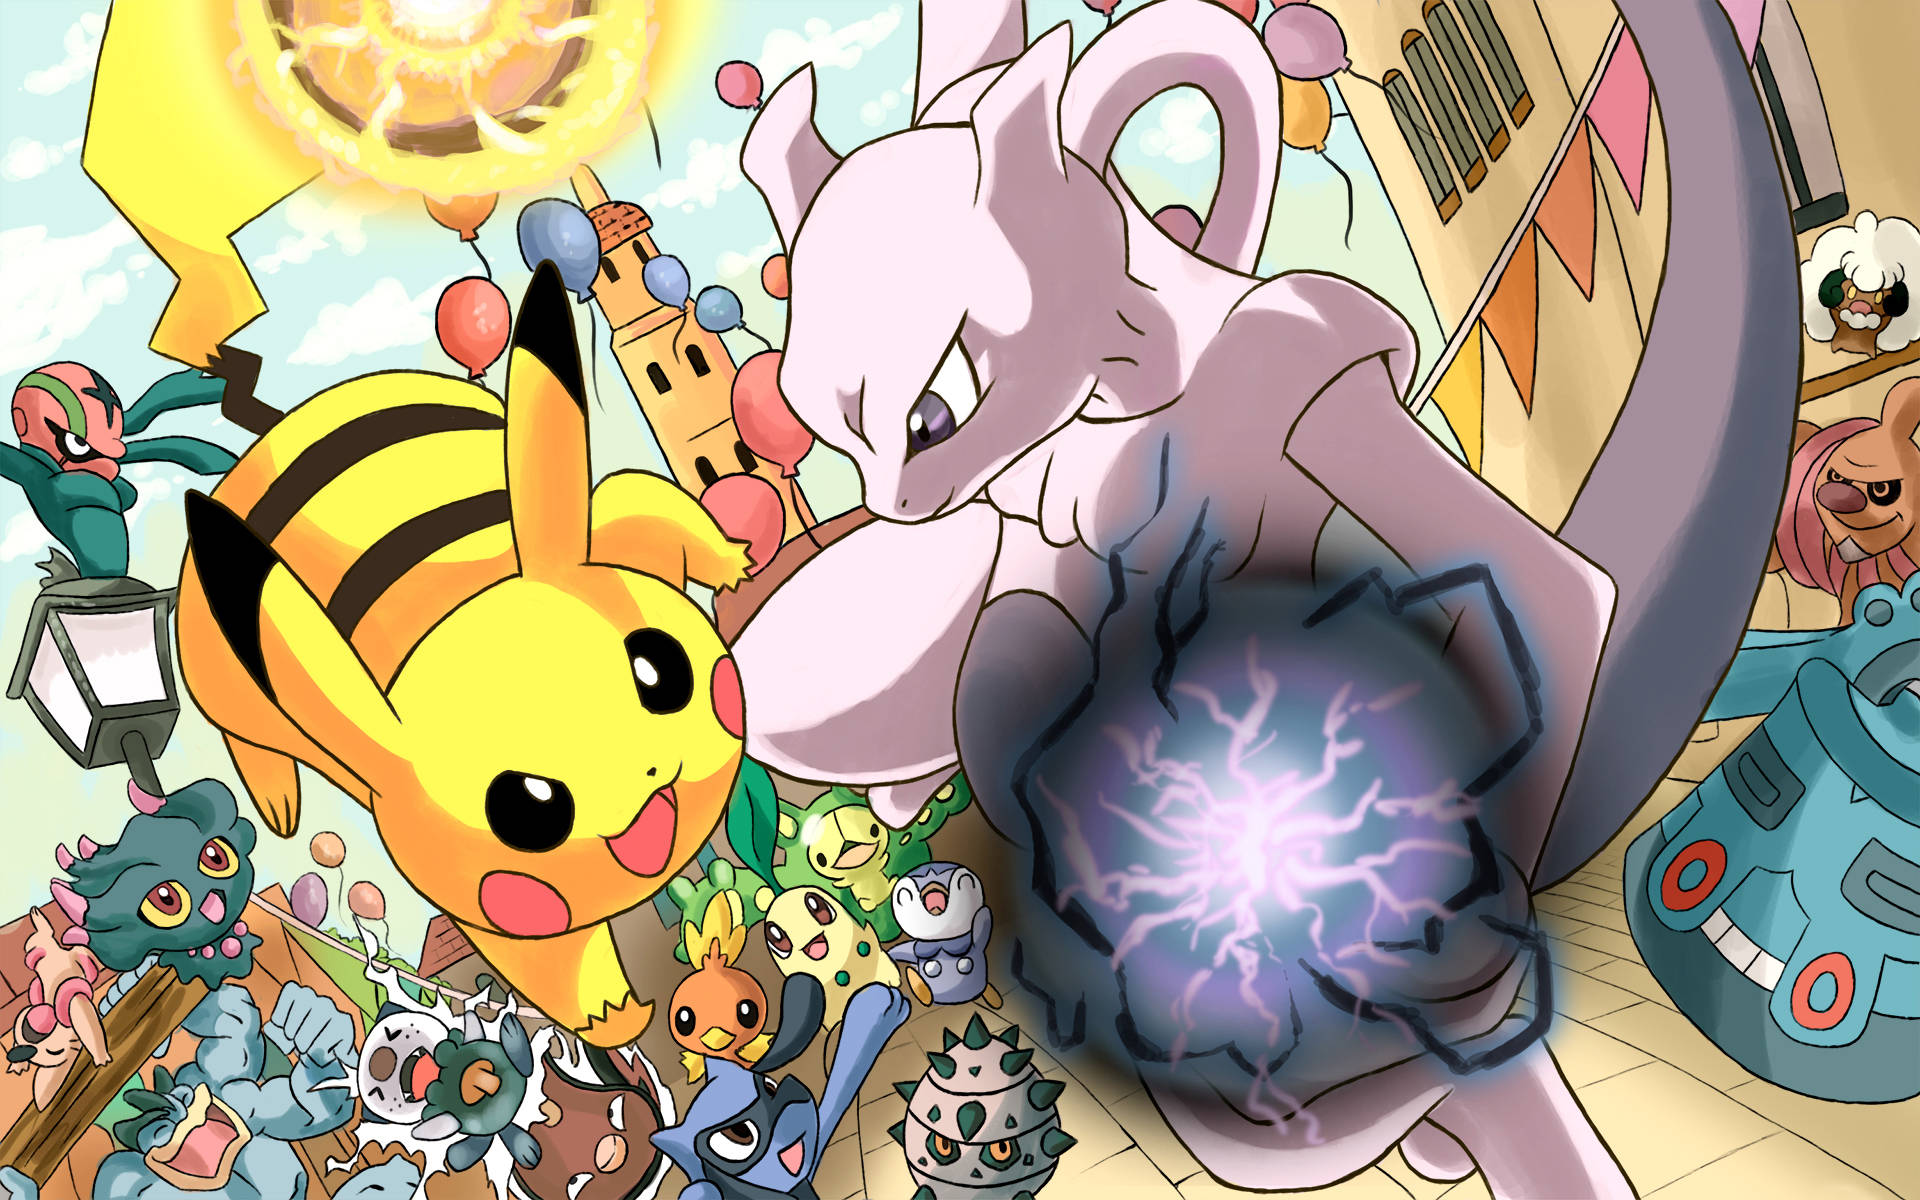 Two Legendary Rivals - Pikachu and Mewtwo Wallpaper